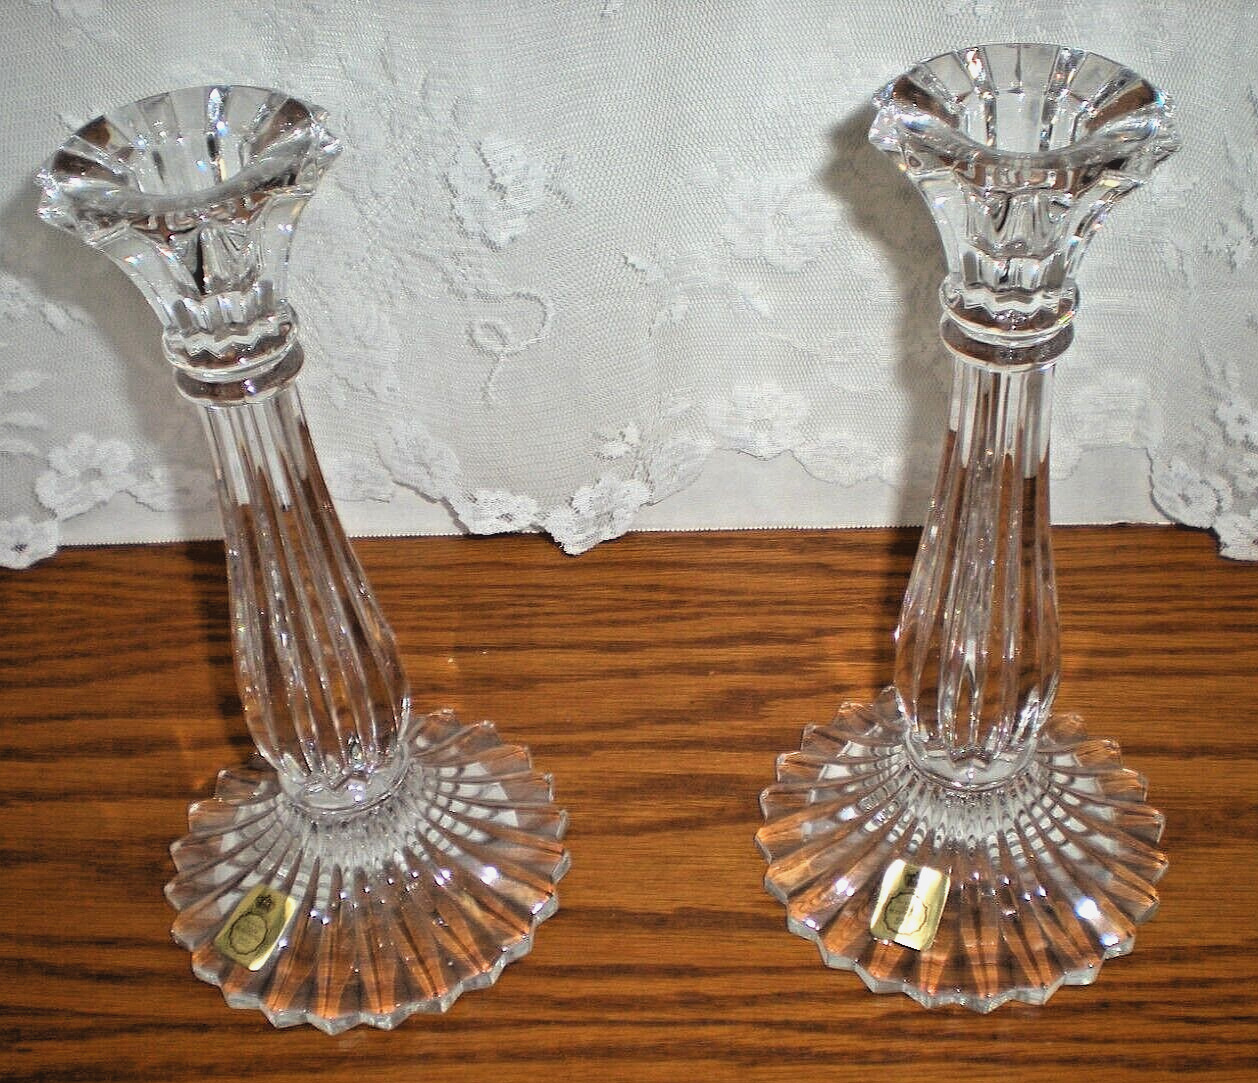 BLEIKRISTALL TALL TAPPER CANDLESTICK HOLDERS, Germany, Vintage 24% Lead Crystal